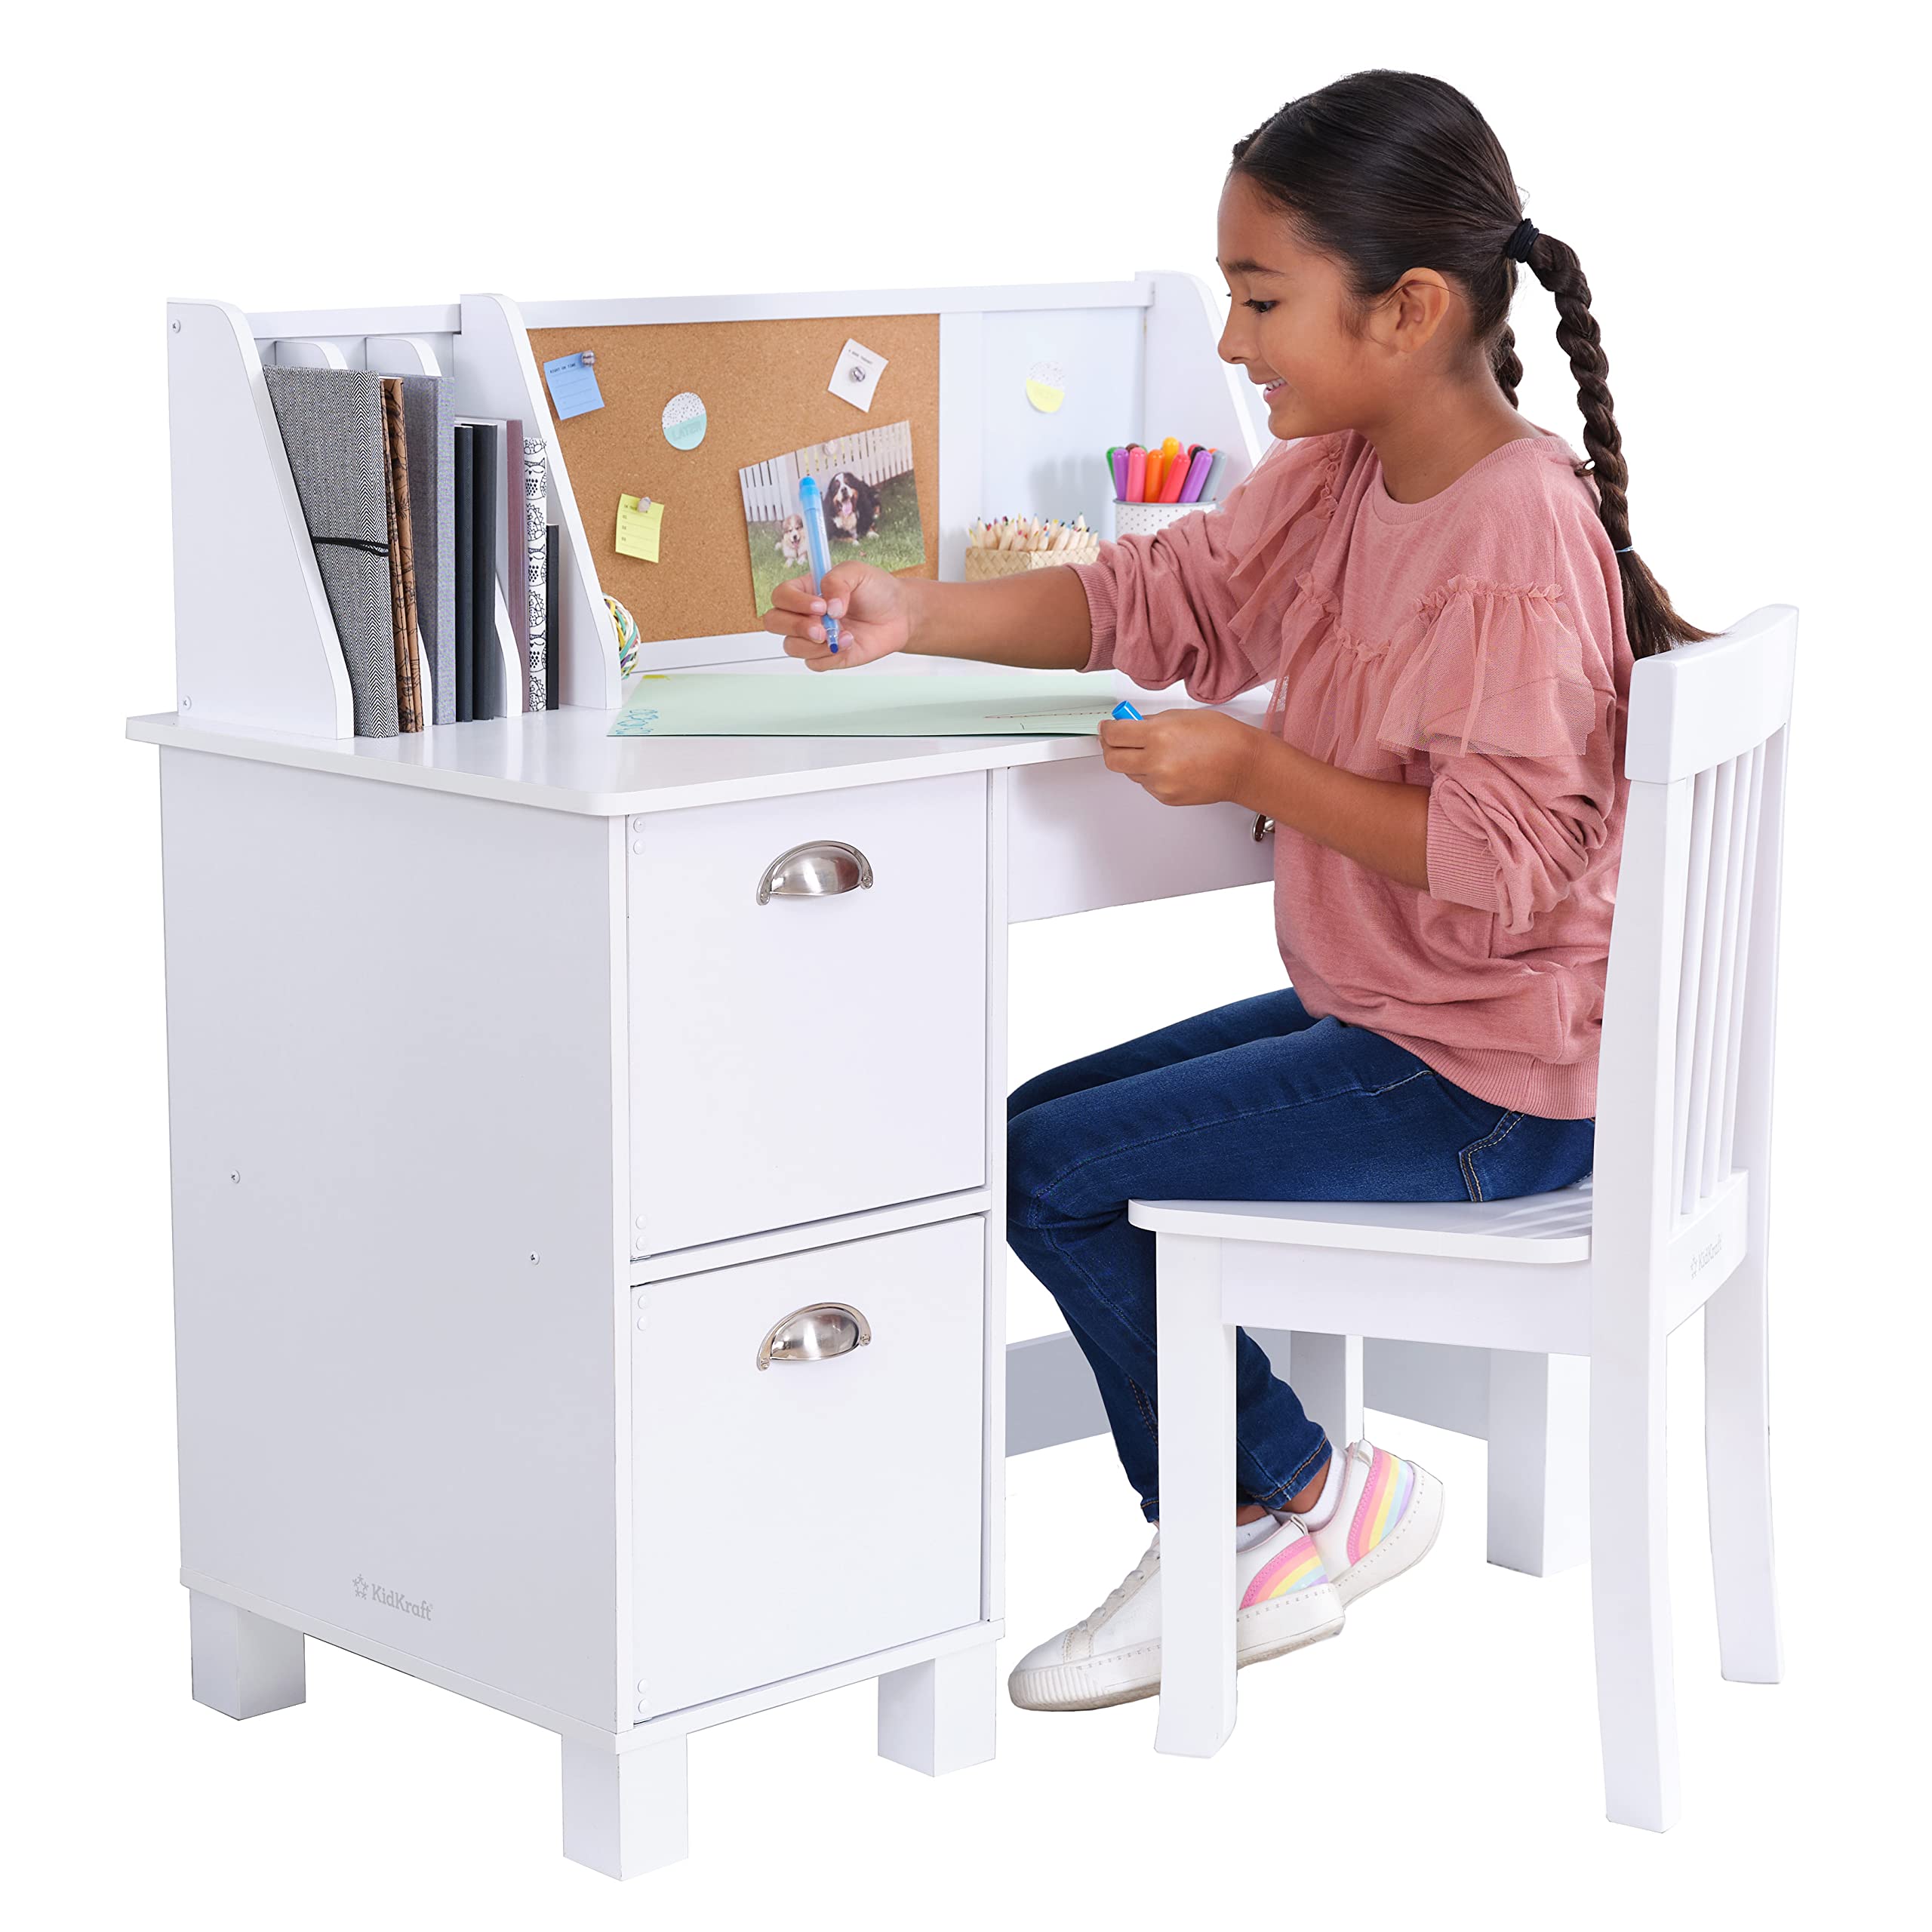 KidKraft Wooden Study Desk for Children with Chair, Bulletin Board and Cabinets, White